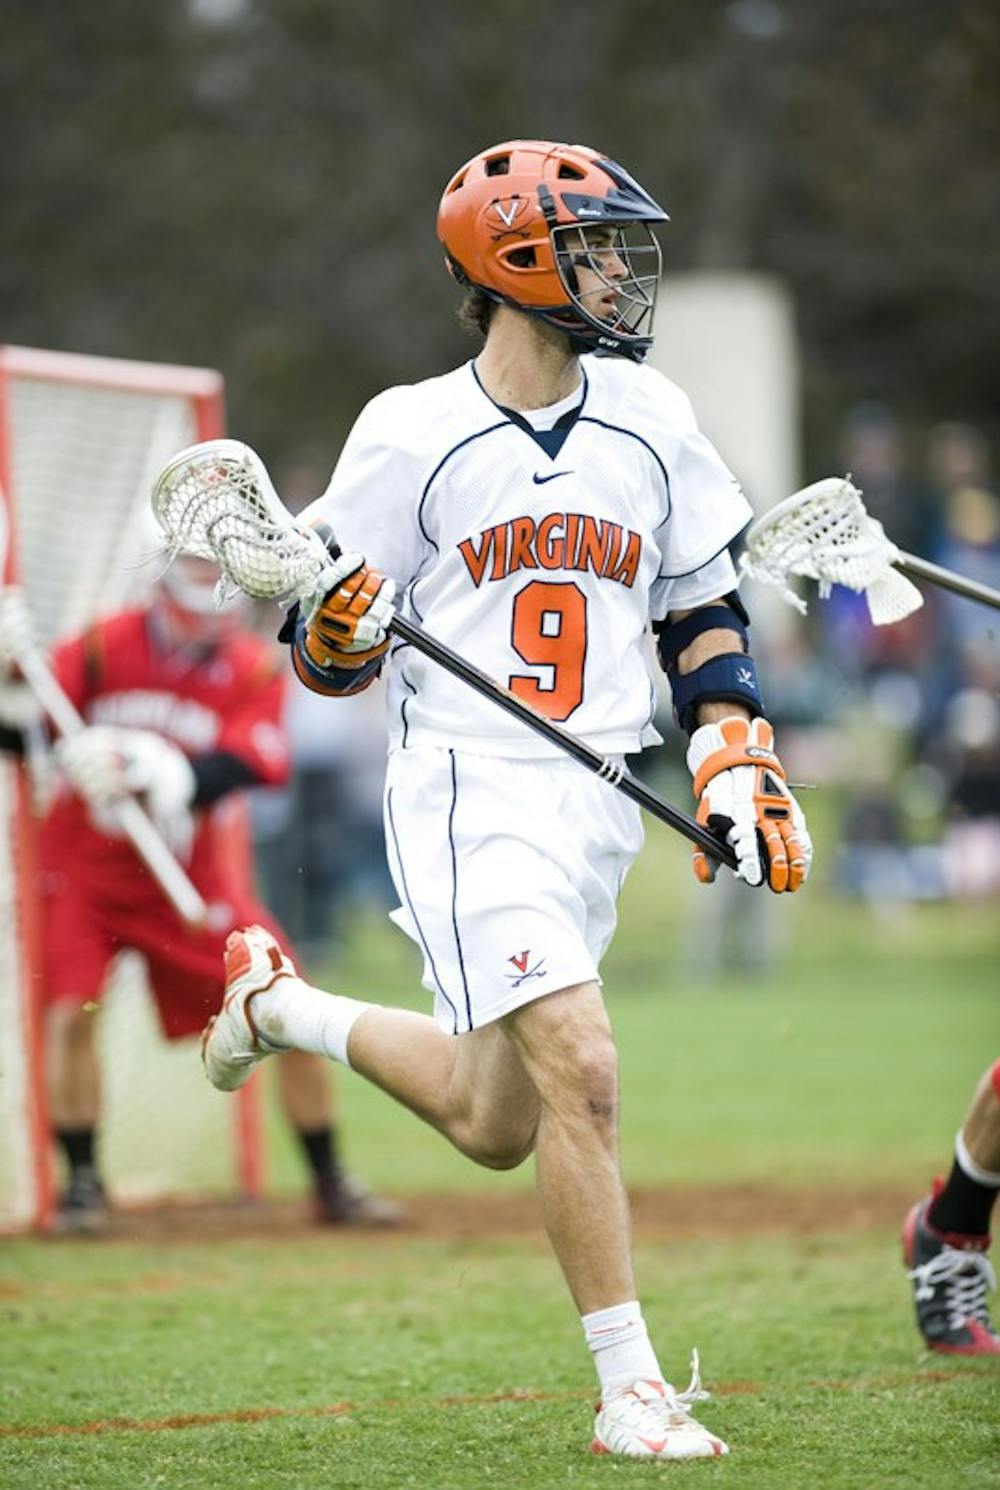 	<p>All-American Danny Glading led the Cavaliers to a 13-1 season. His career ended in disappointment, however, after a 16-5 loss to Cornell in the <span class="caps">NCAA</span> tournament. His loss leaves a big hole to fill on offense. Photo by: Bennett Sorbo</p>